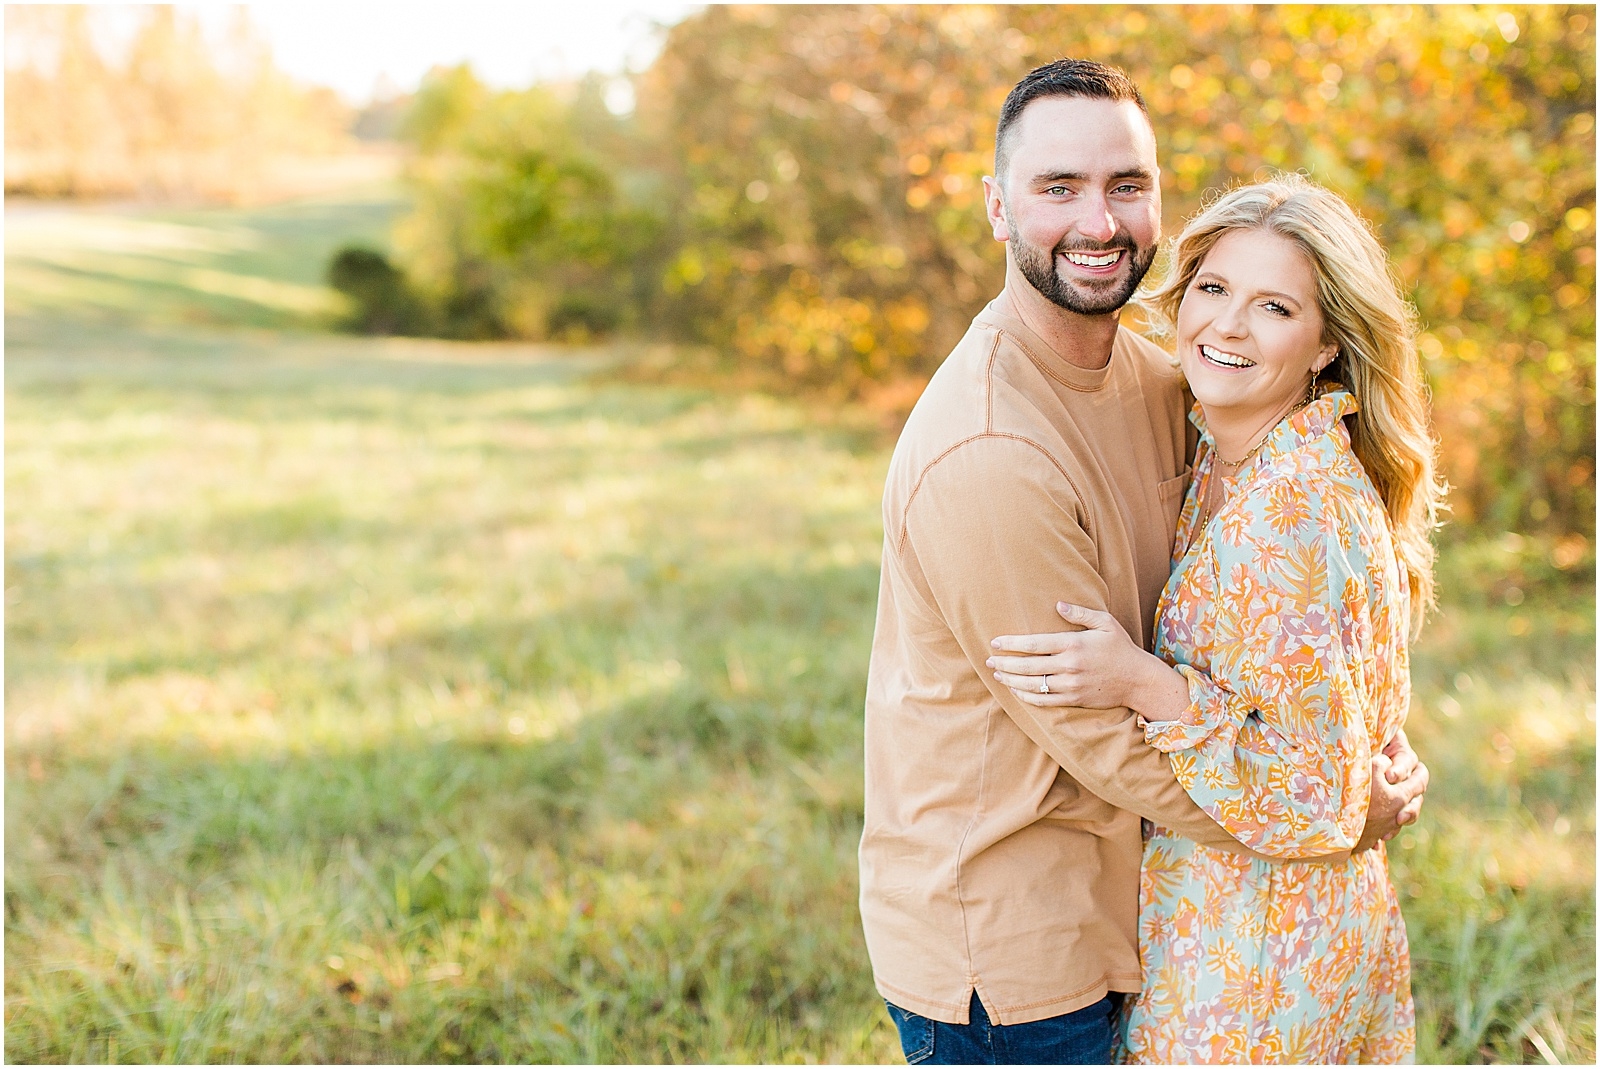 A Southern Indiana Engagement Session | Charleston and Erin | Bret and Brandie Photography003.jpg